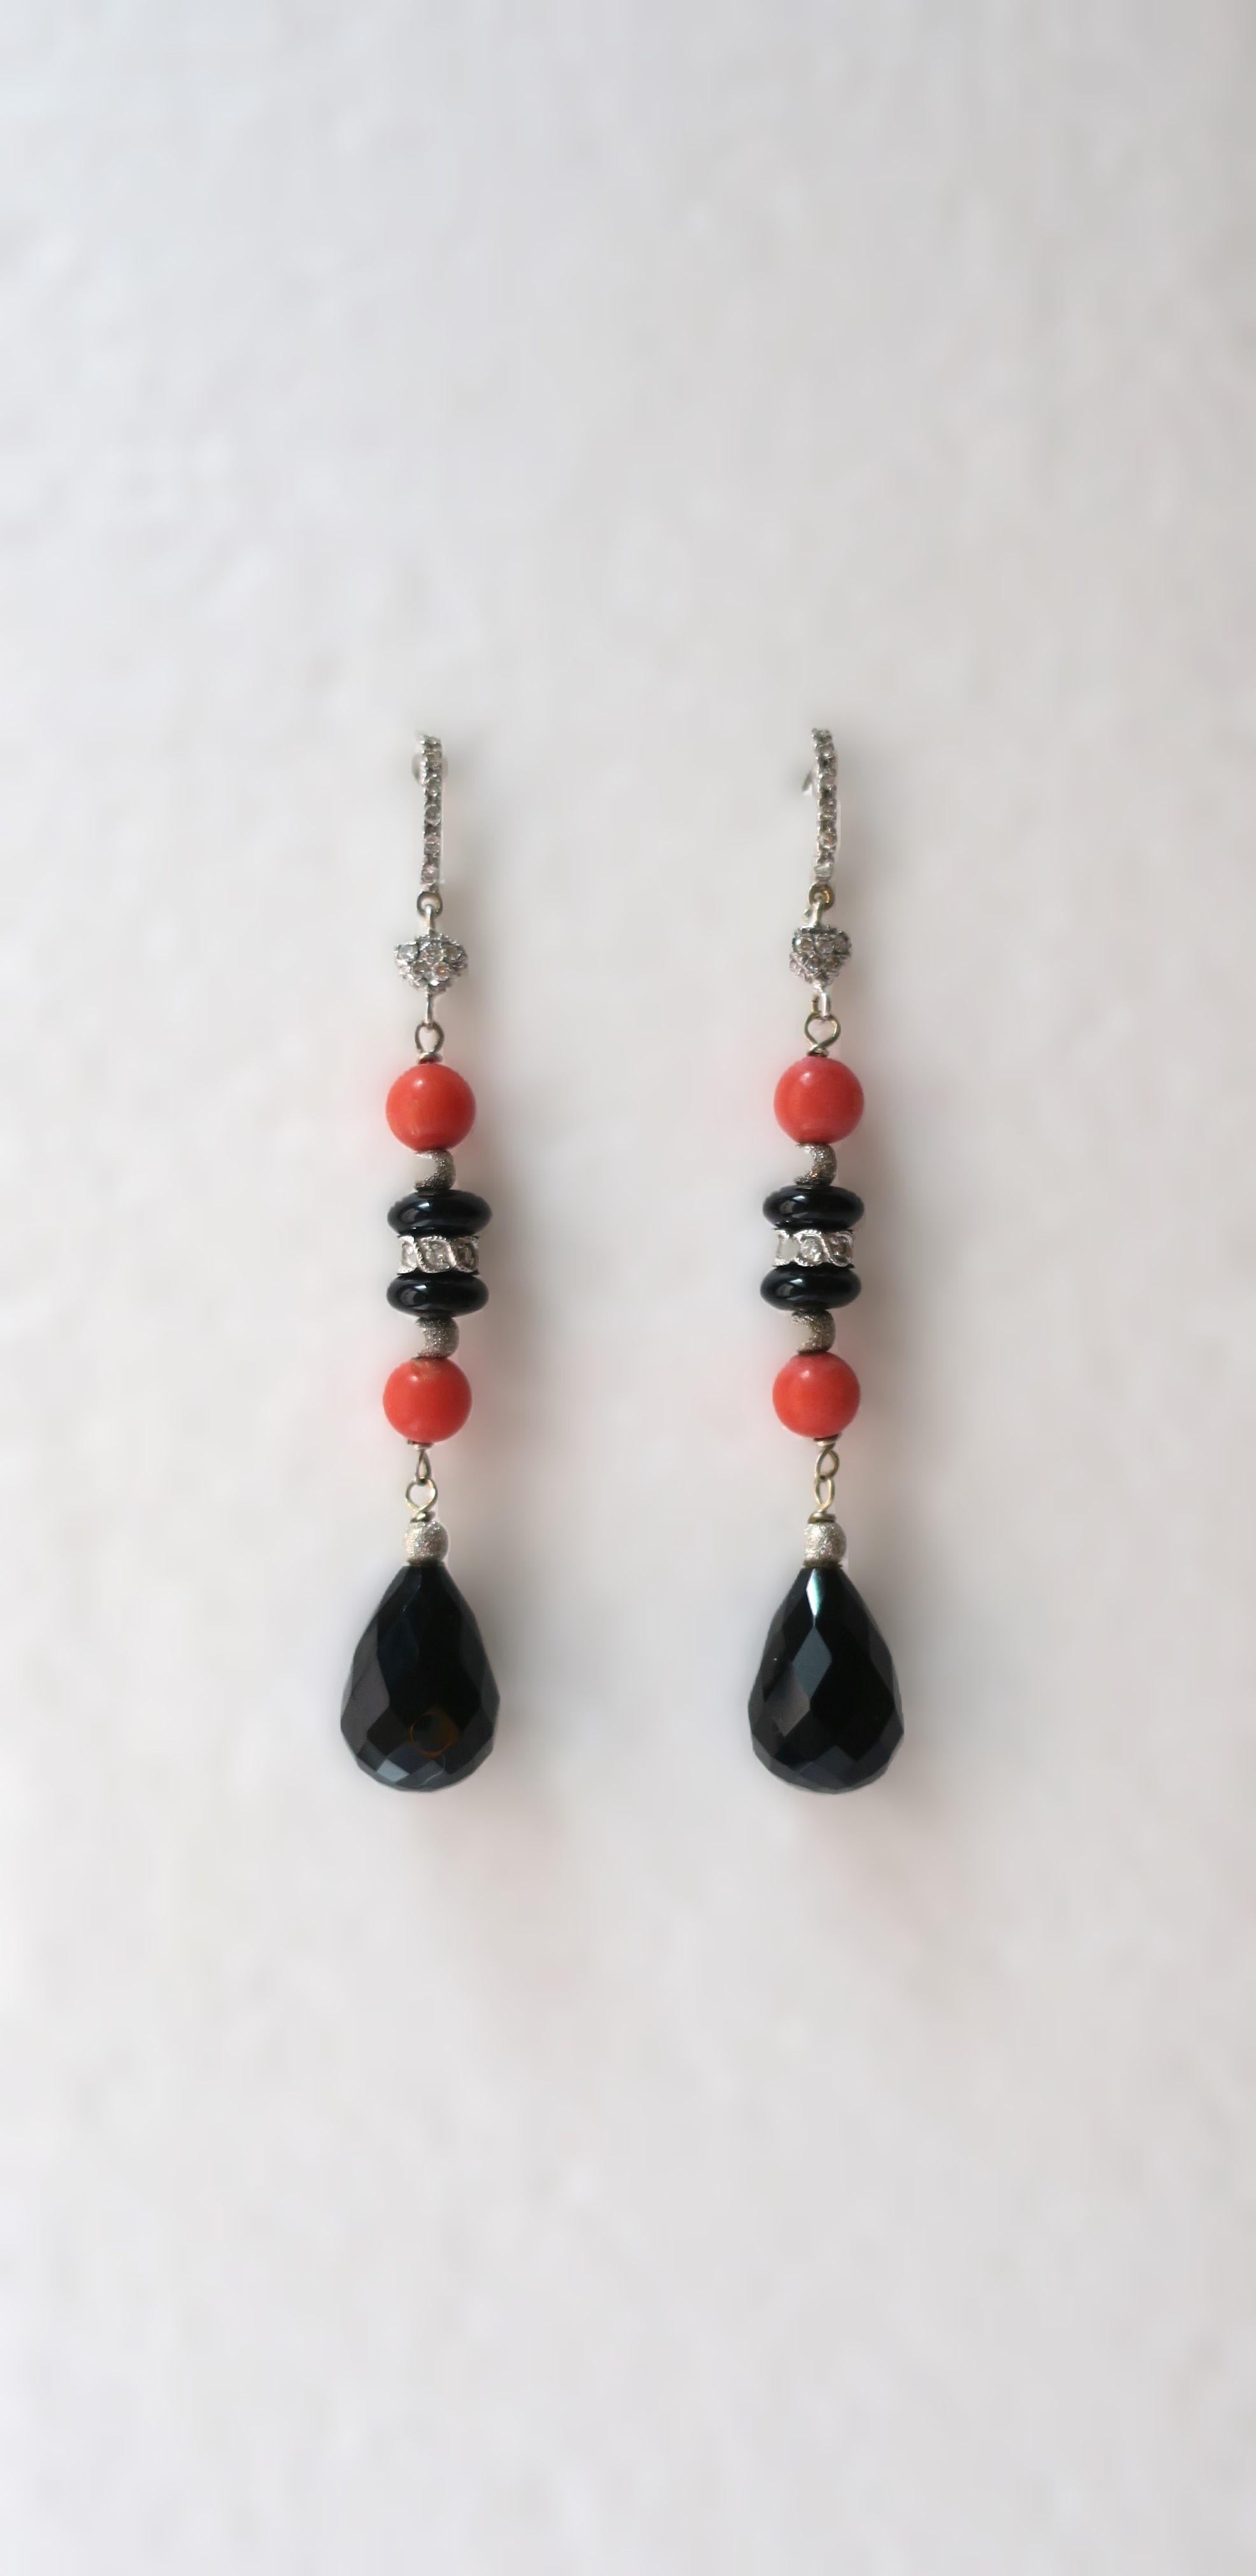 A very beautiful pair of Italian diamond, coral, black onyx, 18-karat white gold dangle earrings, circa early-2000s. Earrings are pave set diamonds, coral, and black onyx, set in 18-karat white gold. The diamonds are round brilliant cut, with